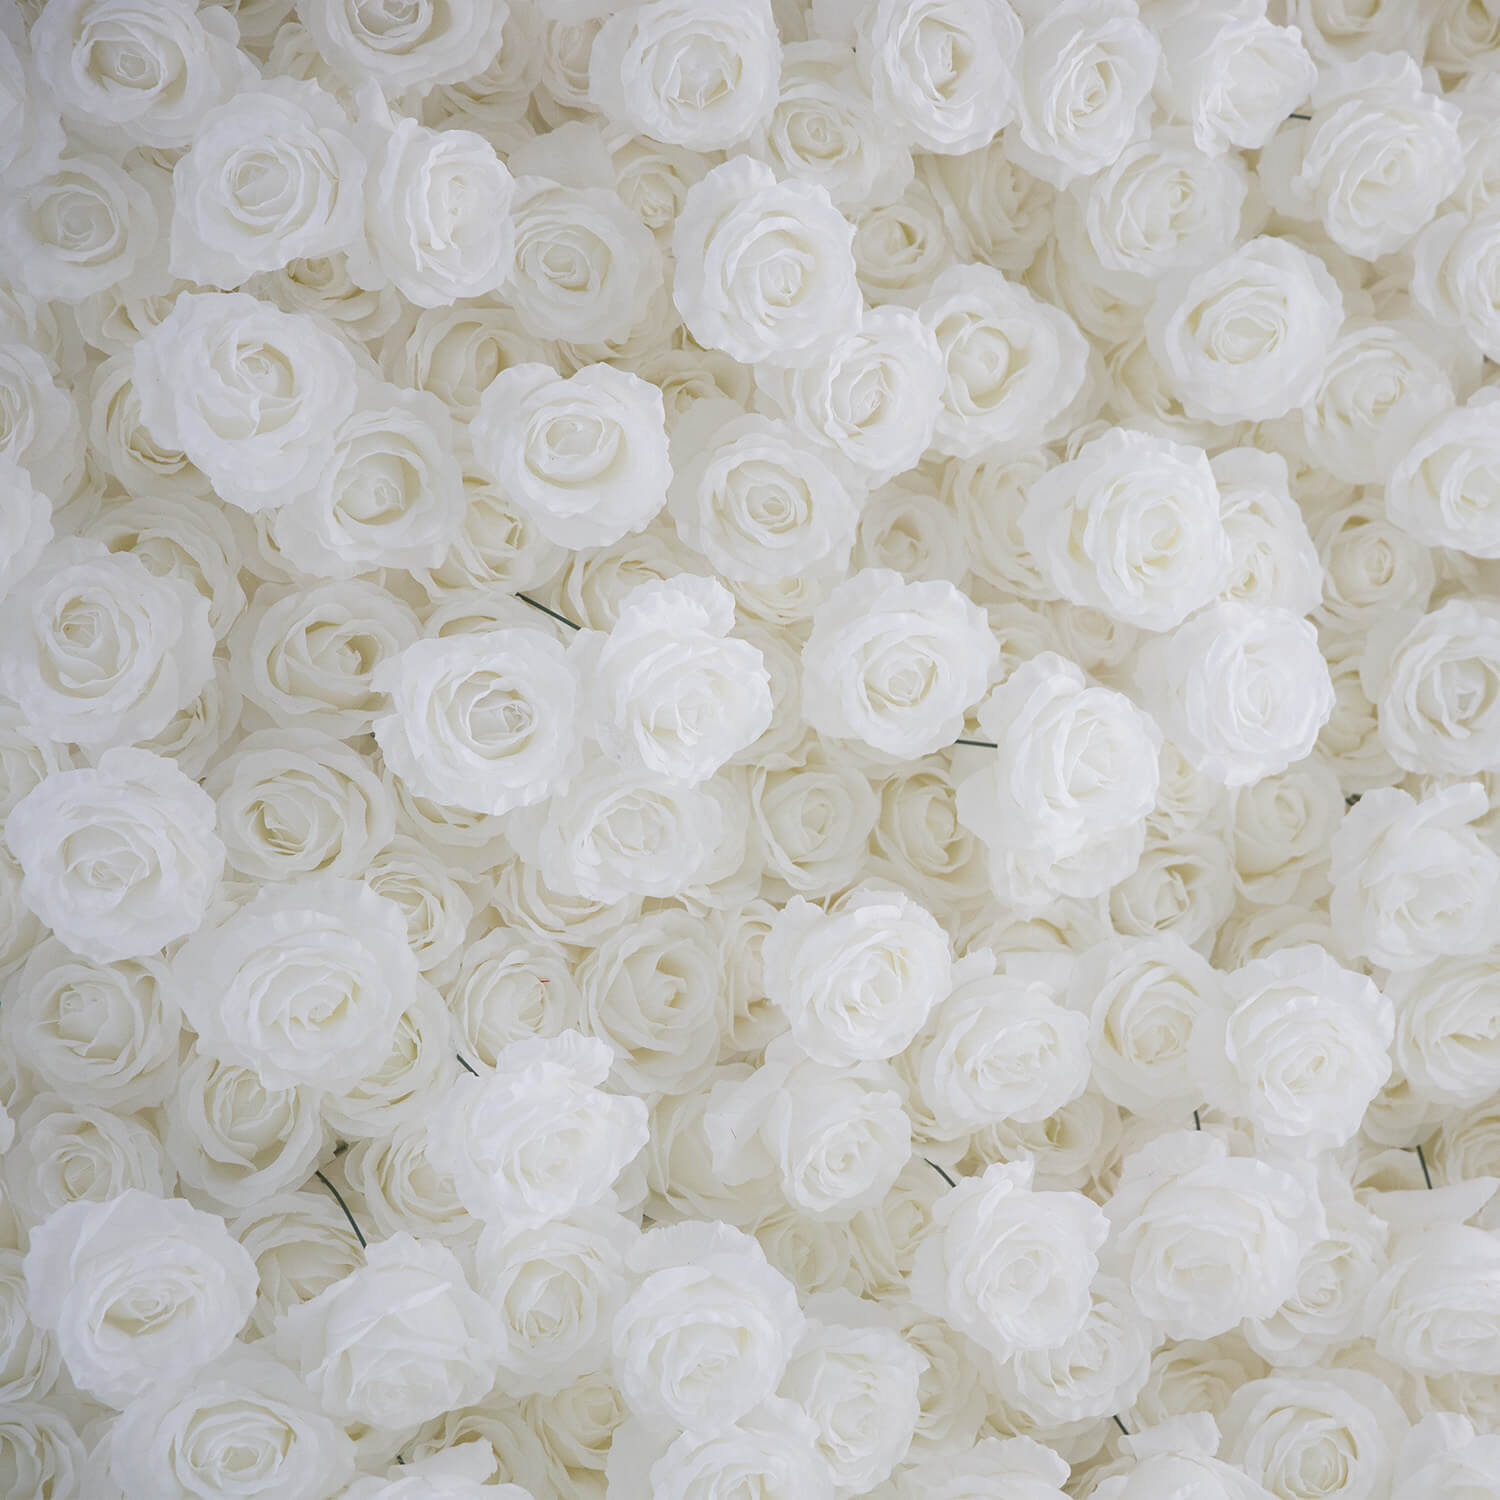 Full White Roses Fabric Artificial Flower Wall For Wedding Arrangement ...